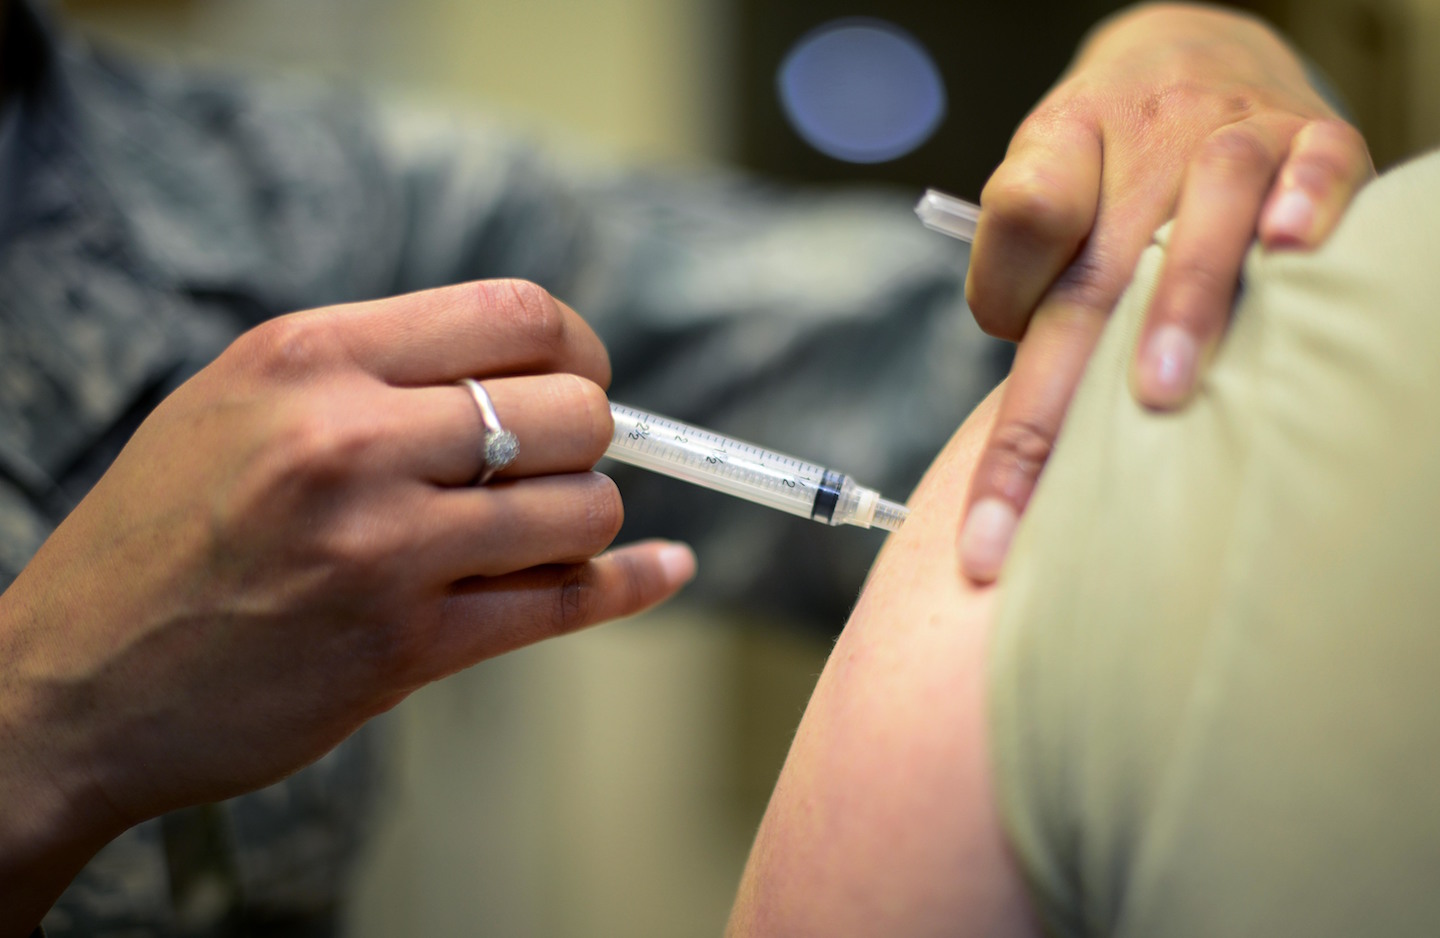 One million COVID-19 vaccines sent to South Africa put on hold as the